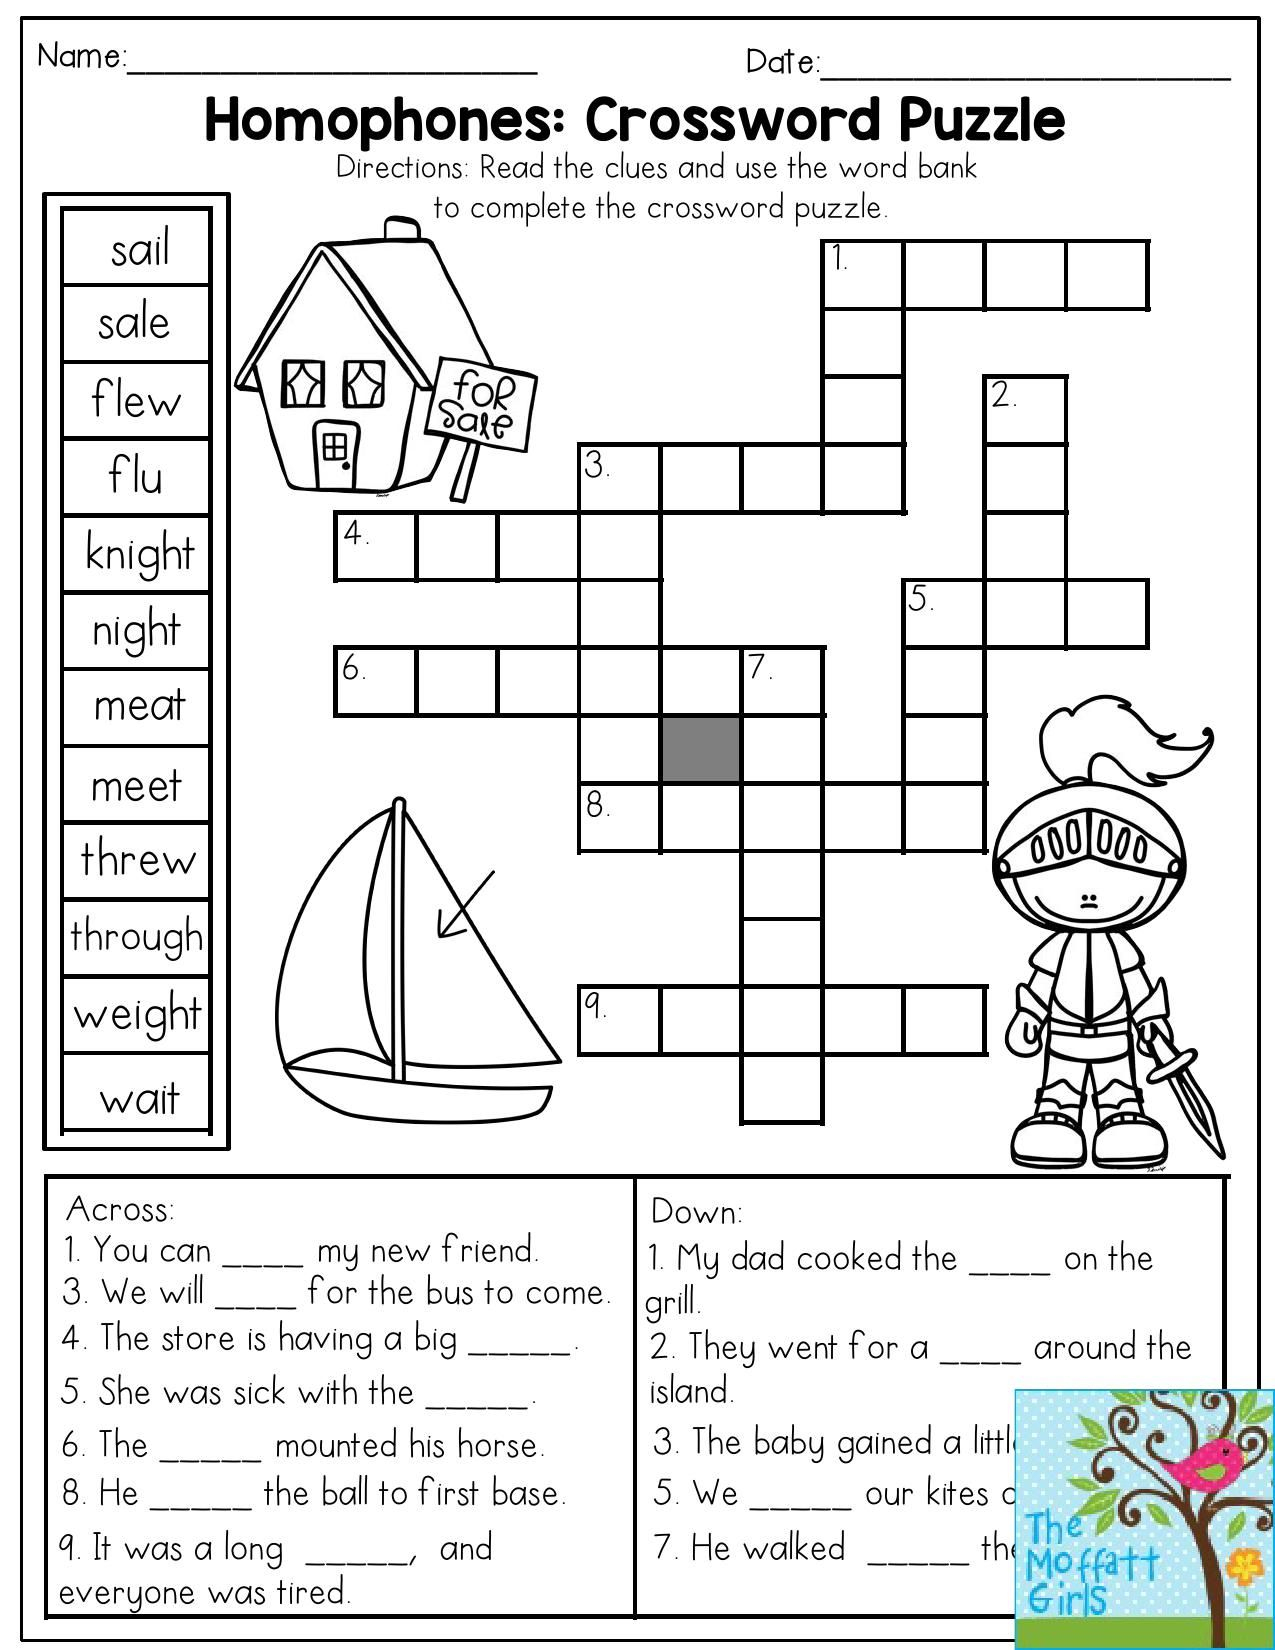 Homophones: Crossword Puzzle- Read The Clues And Use The Word Bank - Printable Crossword Puzzle For Grade 2